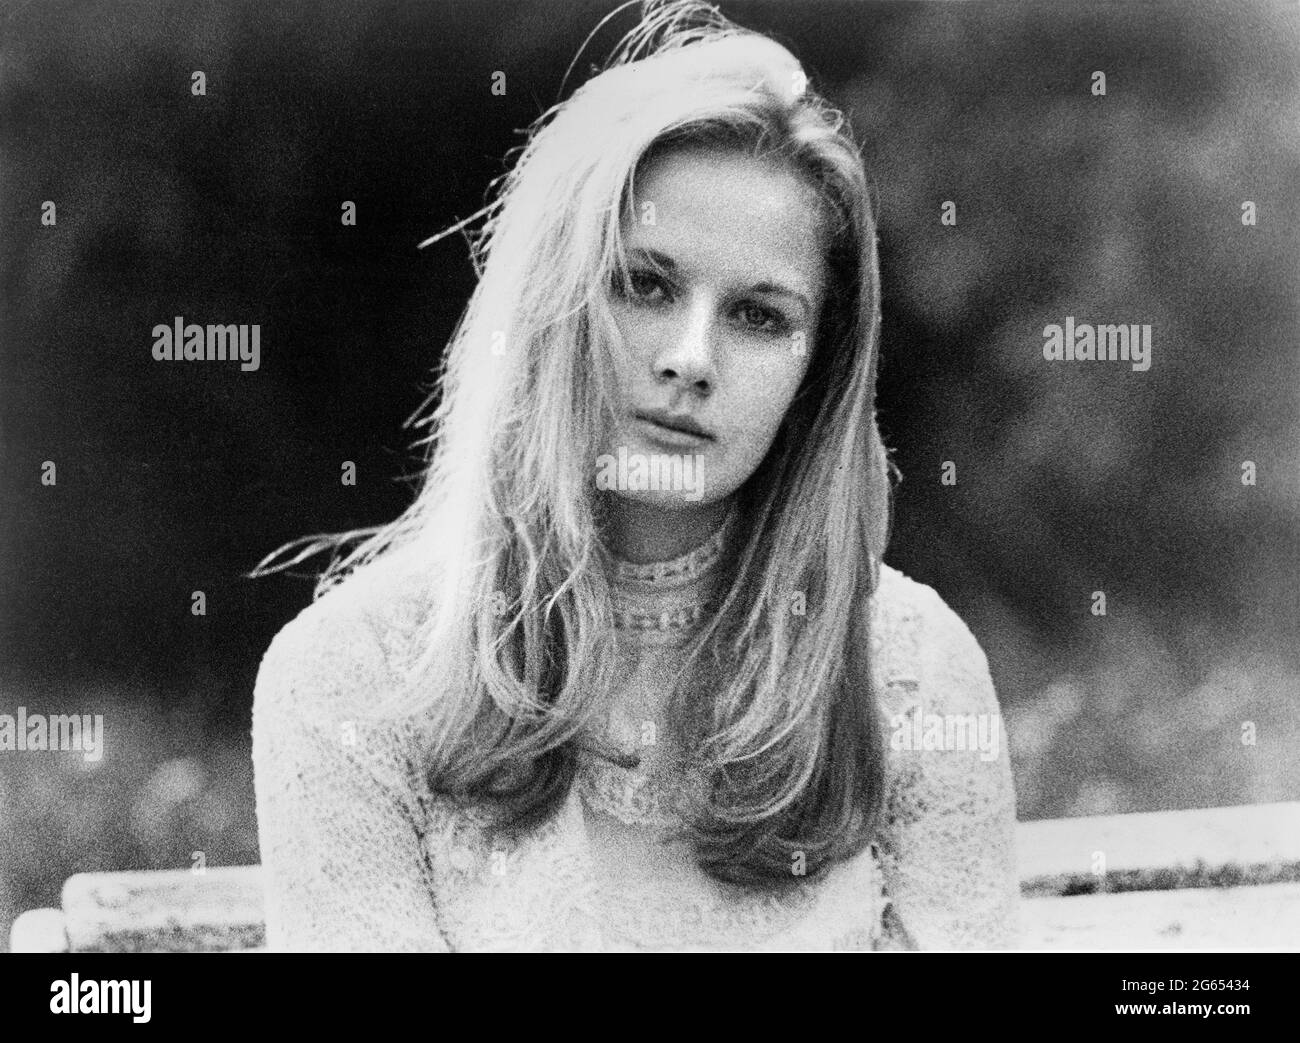 Dominique Sanda, Head and Shoulders Publicity Portrait for the Film, 'First Love', German title: 'Erste Liebe',  Universal Marion Corporation (UMC), USA release 1970 Stock Photo